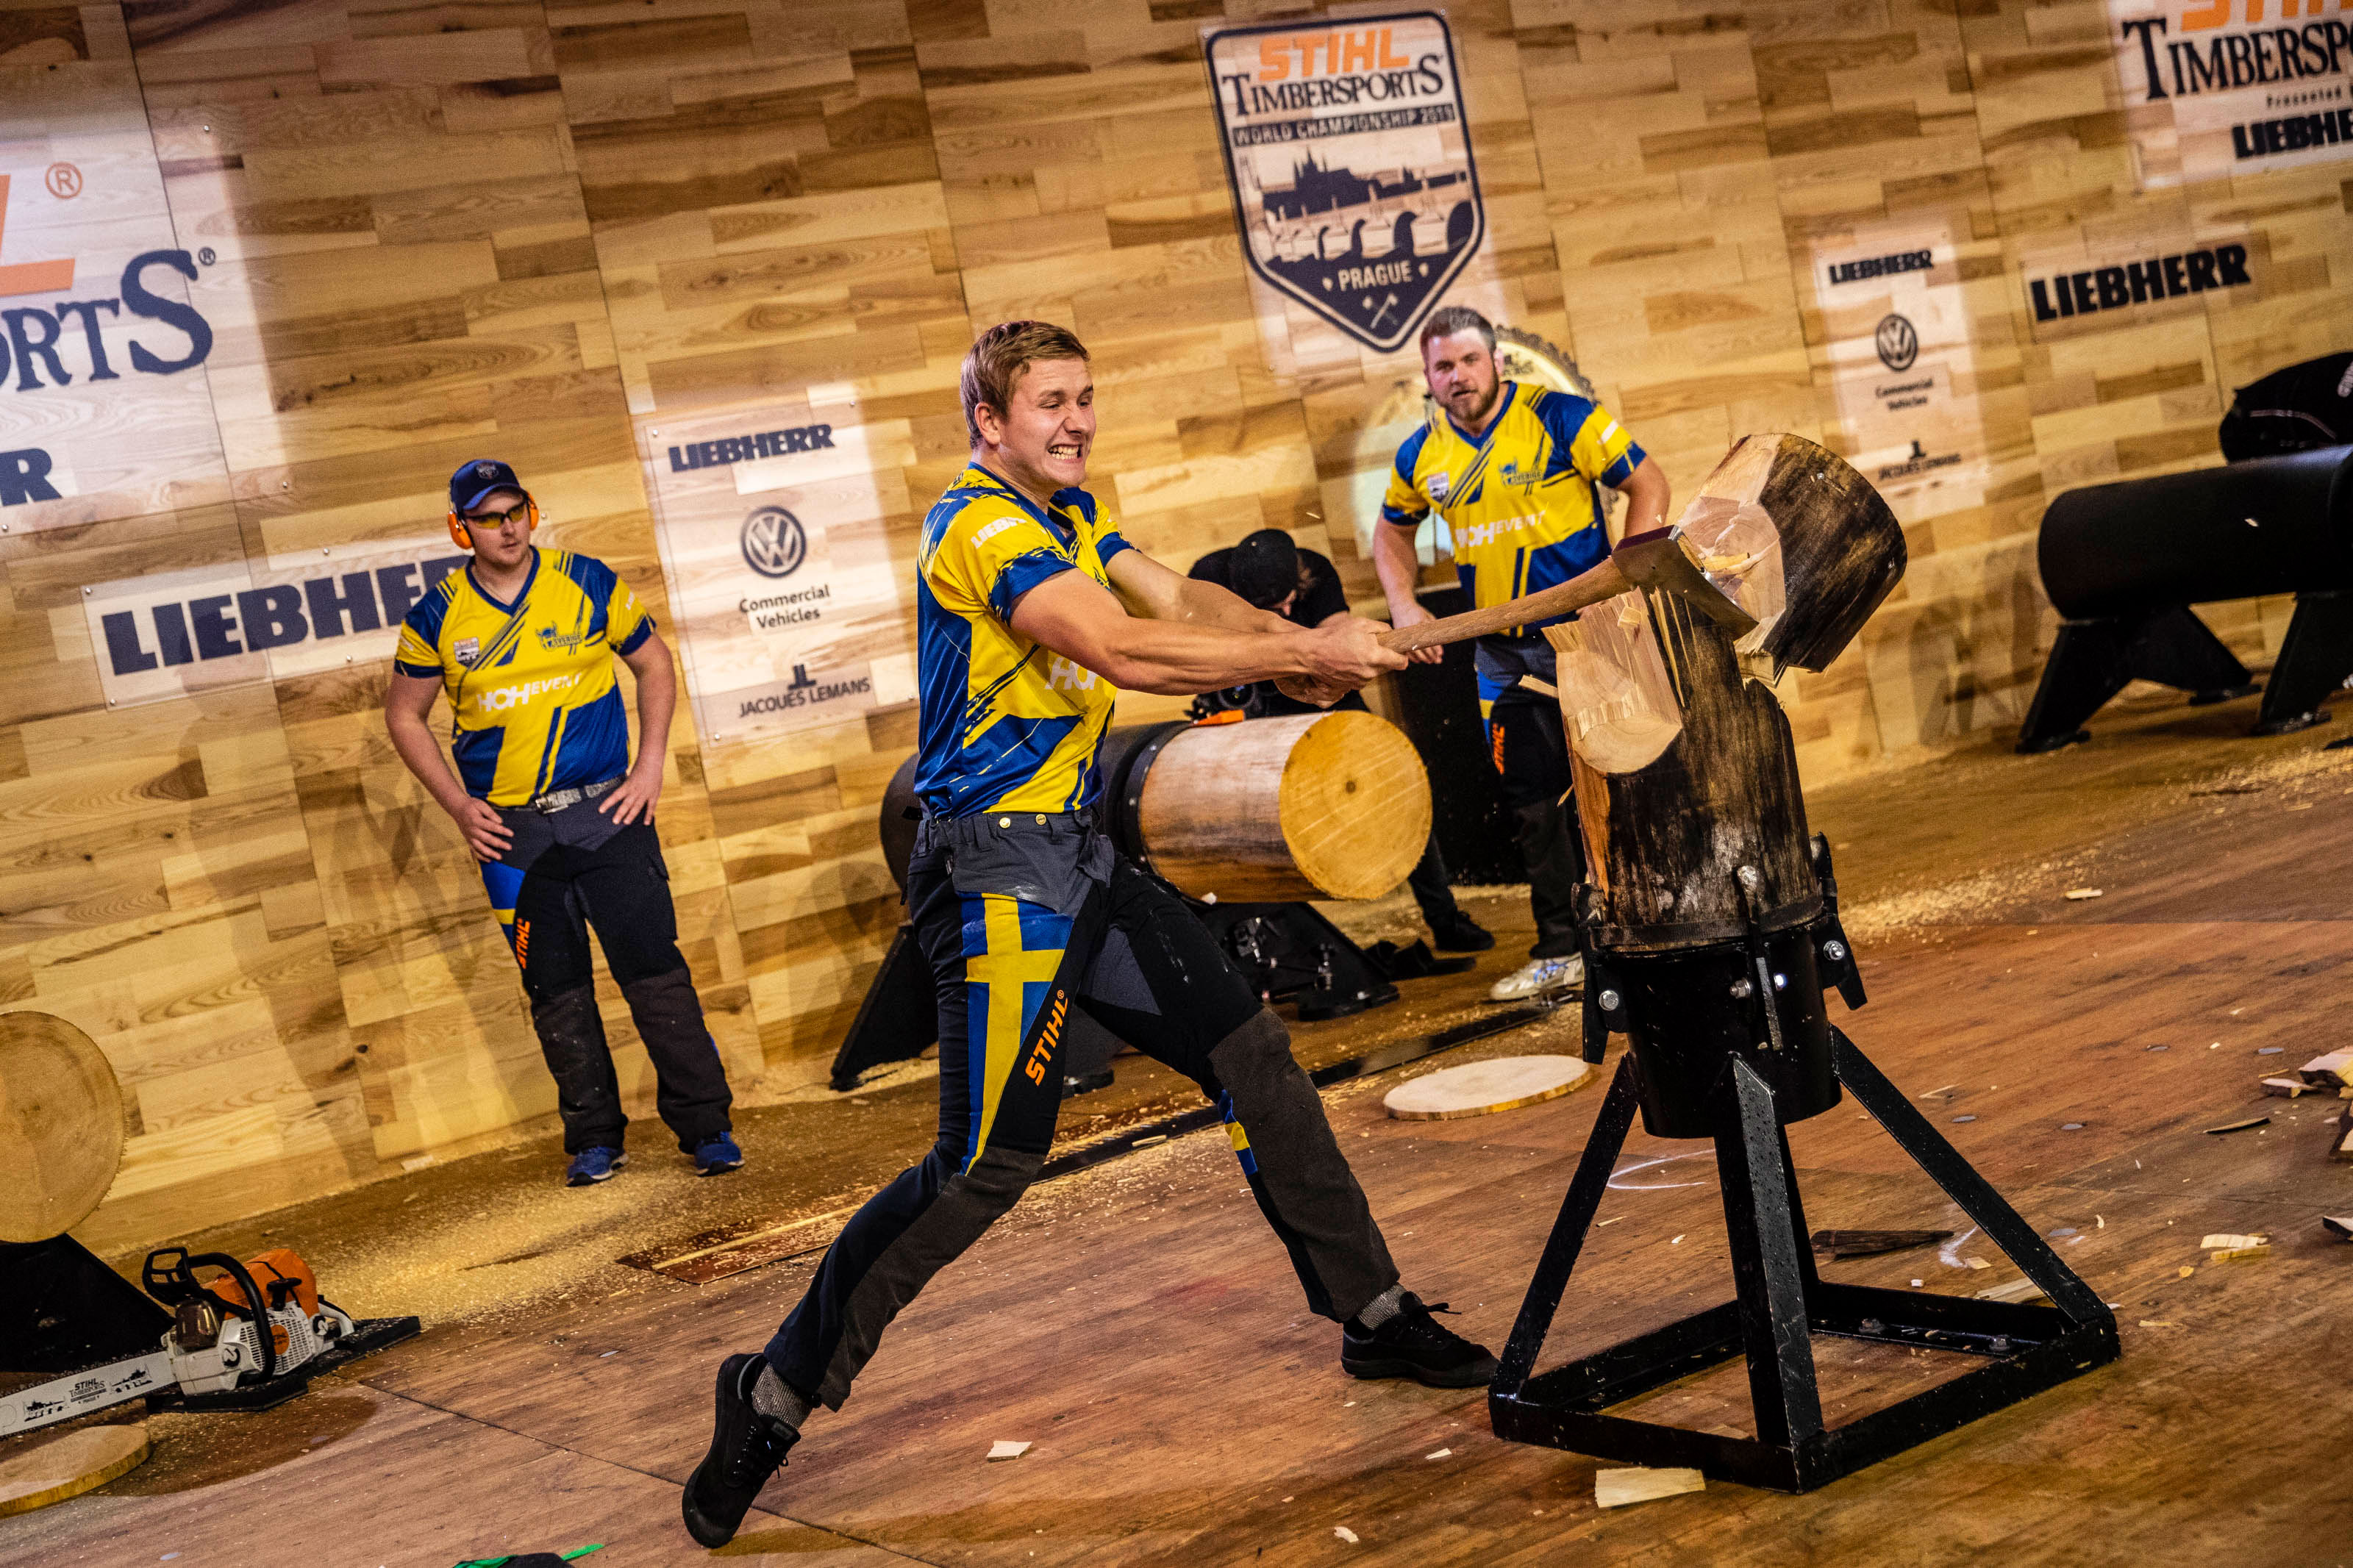 STIHL TIMBERSPORTS® athletes from Sweden at the Team World Championship 2019 in Prague. 